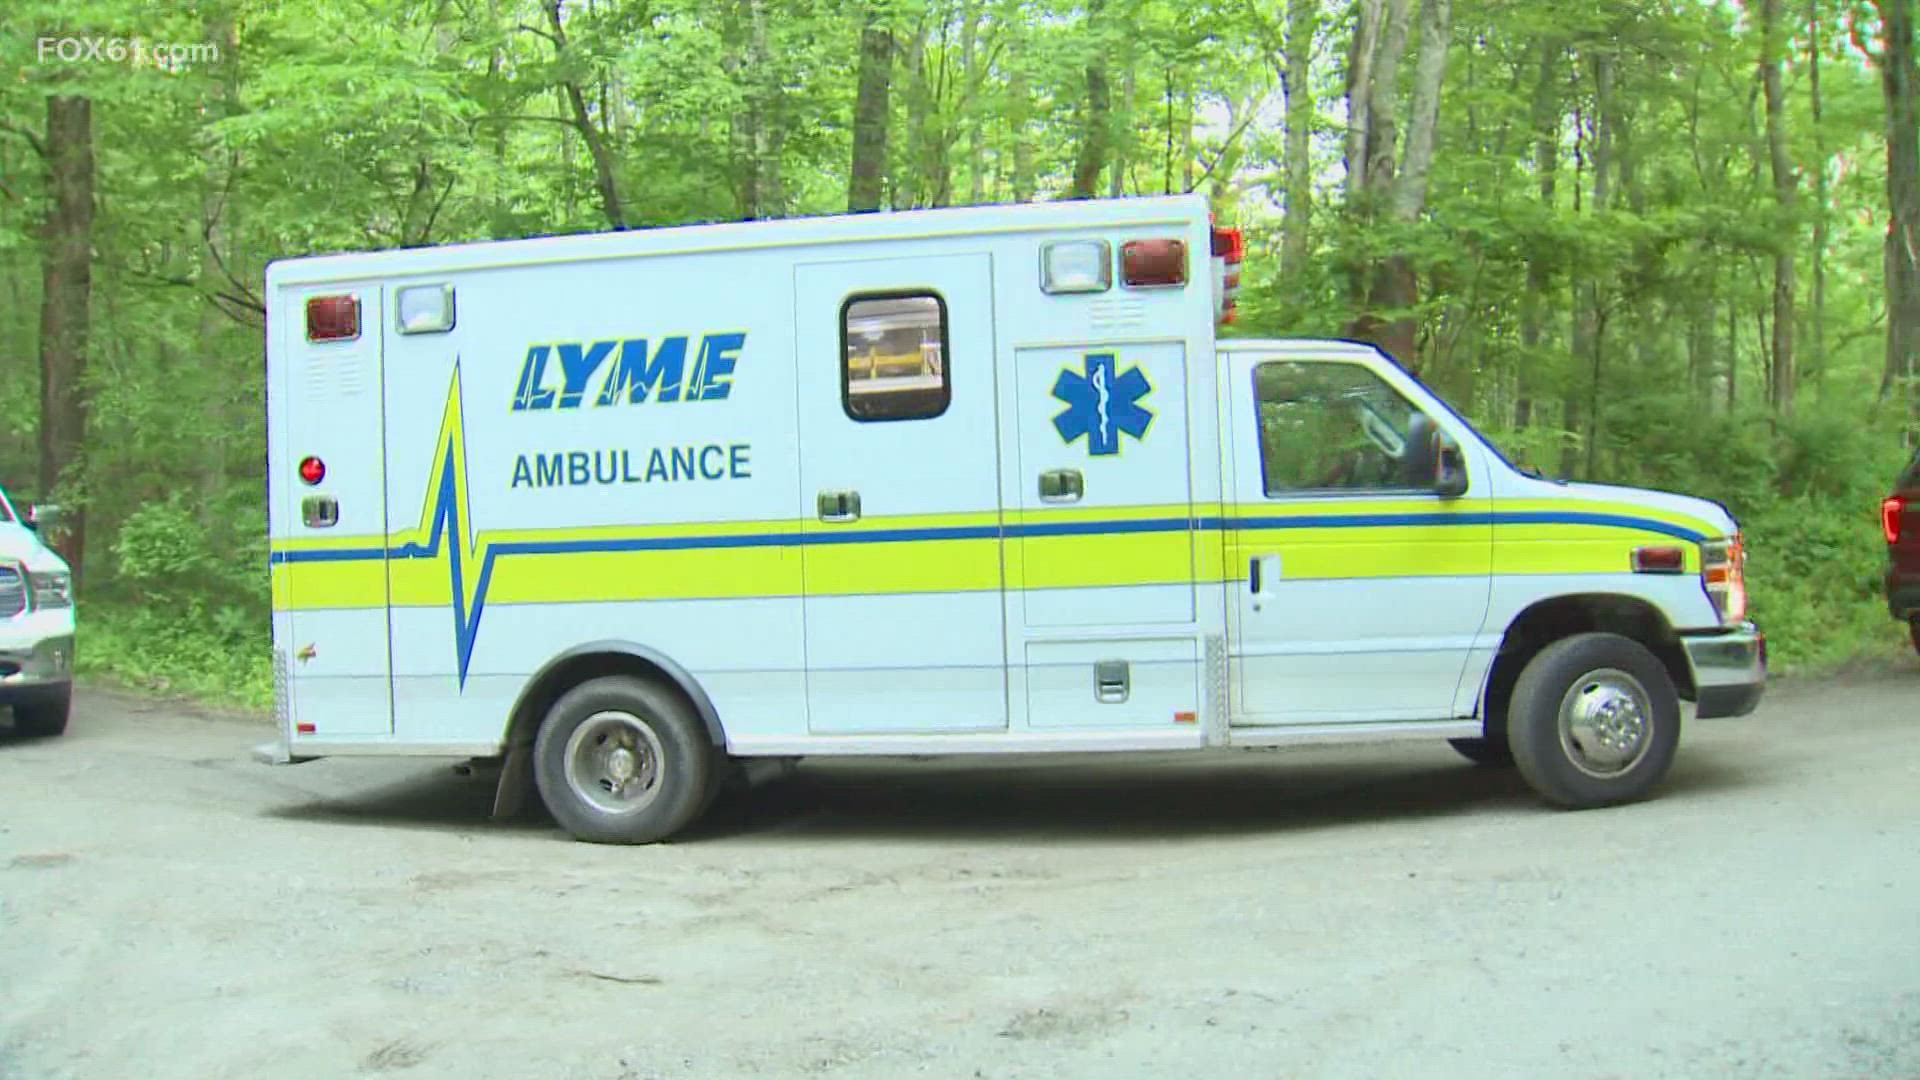 The area dive teams responded to for the report of a missing swimmer was Uncas Pond in Nehantic State Forest.